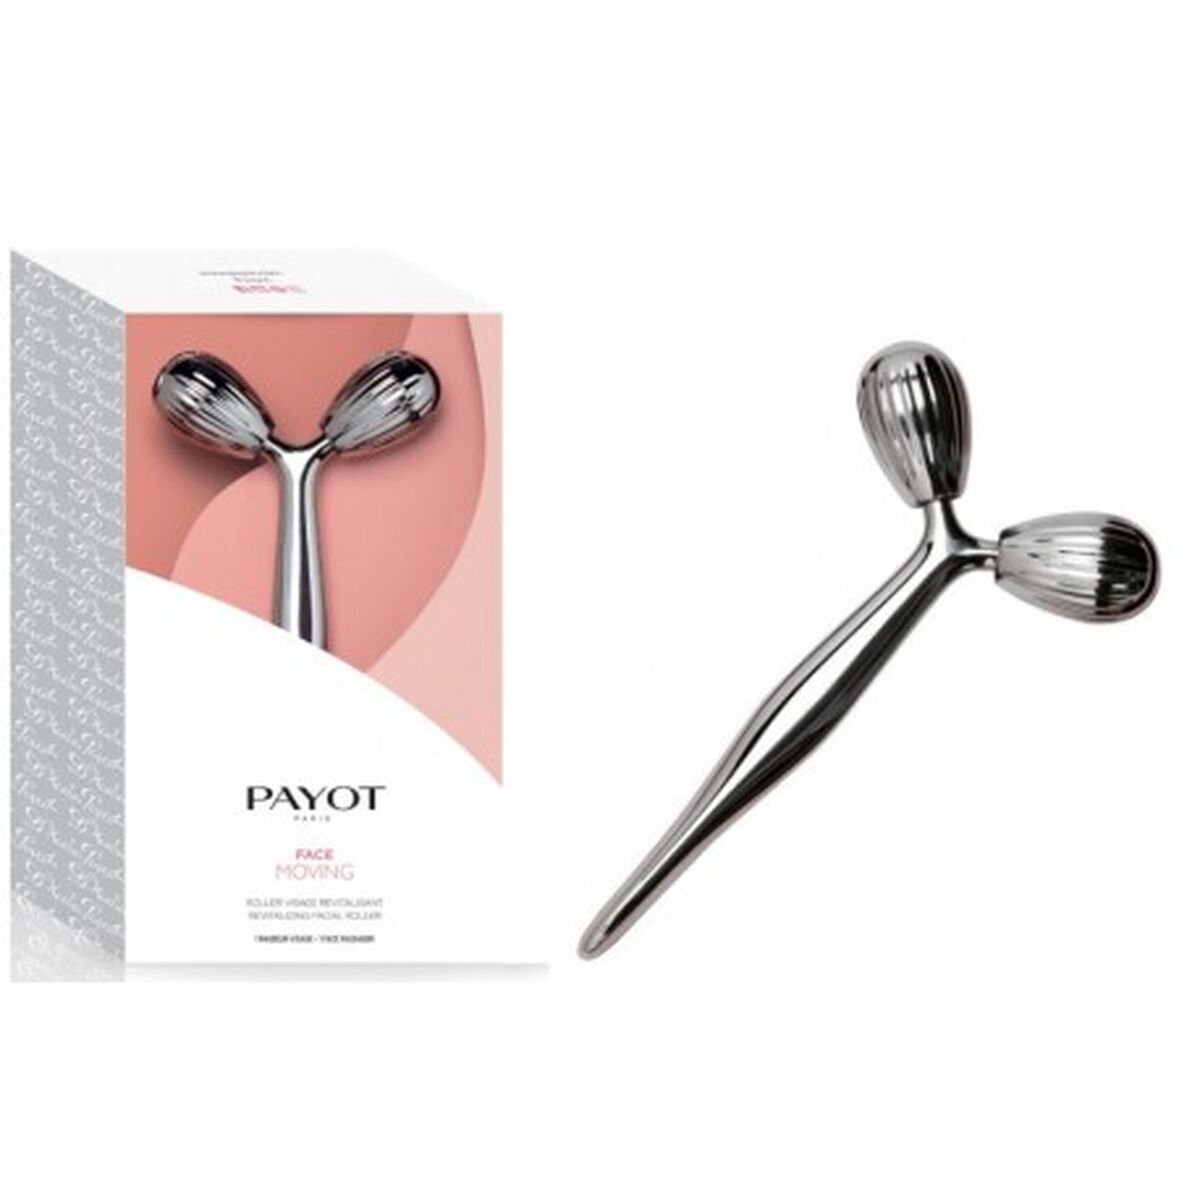 Massager Payot Roselift Roll-On